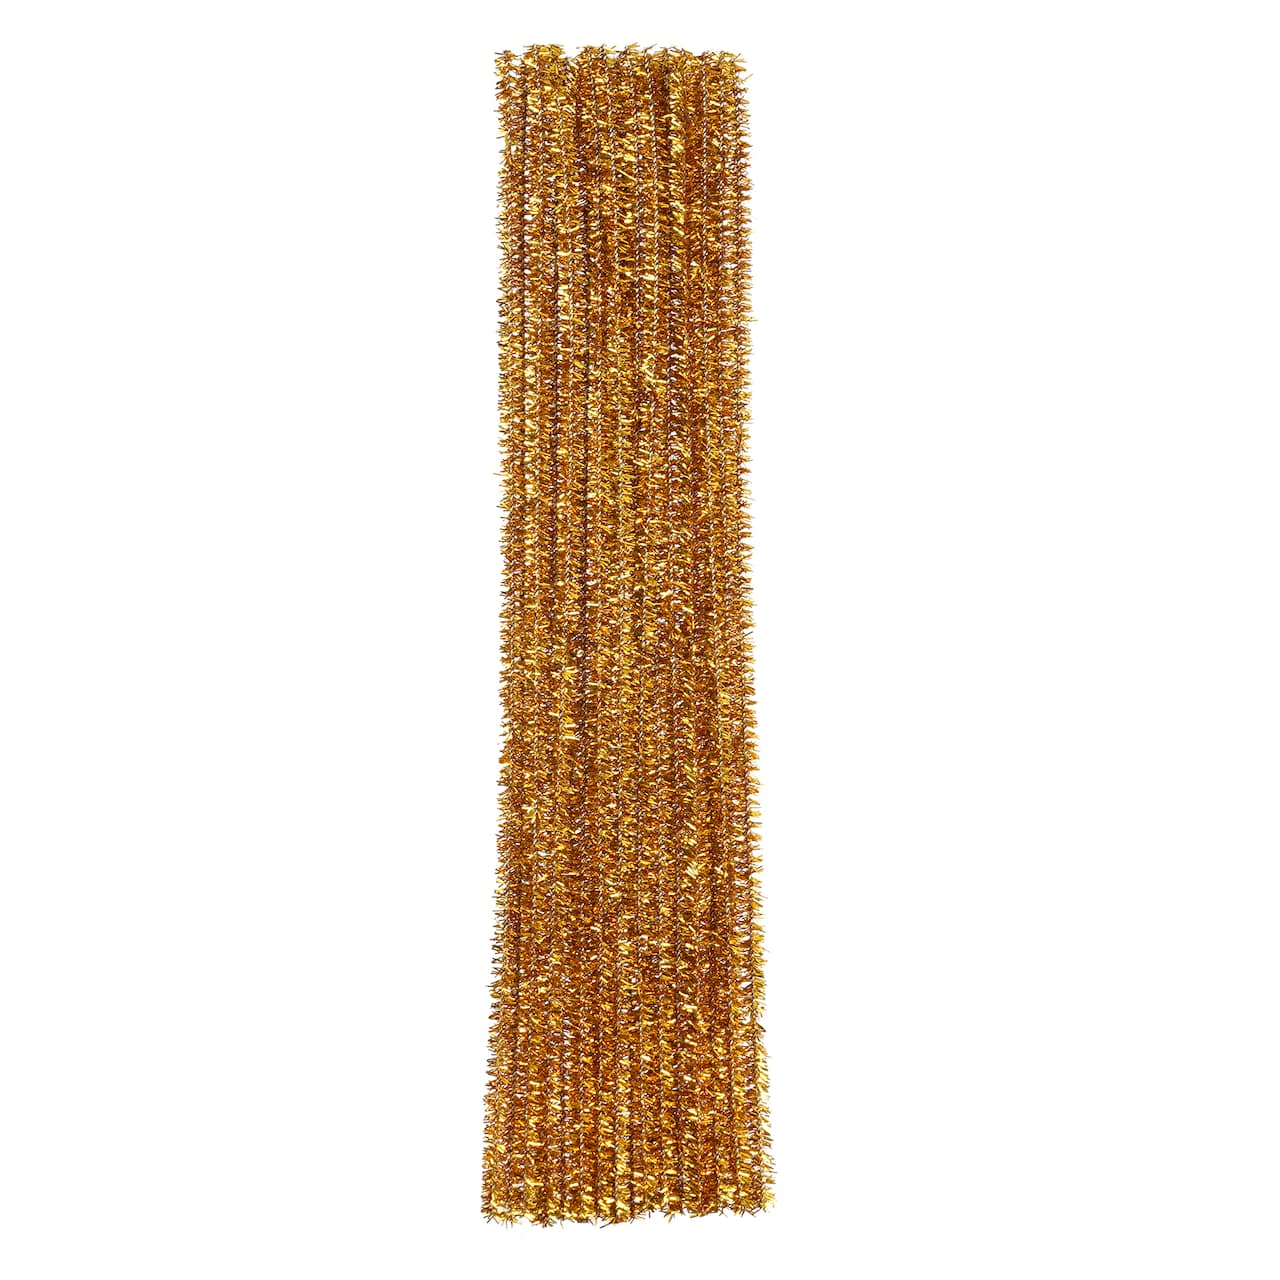 Sparkle Chenille Pipe Cleaners, 25ct. by Creatology&#x2122;